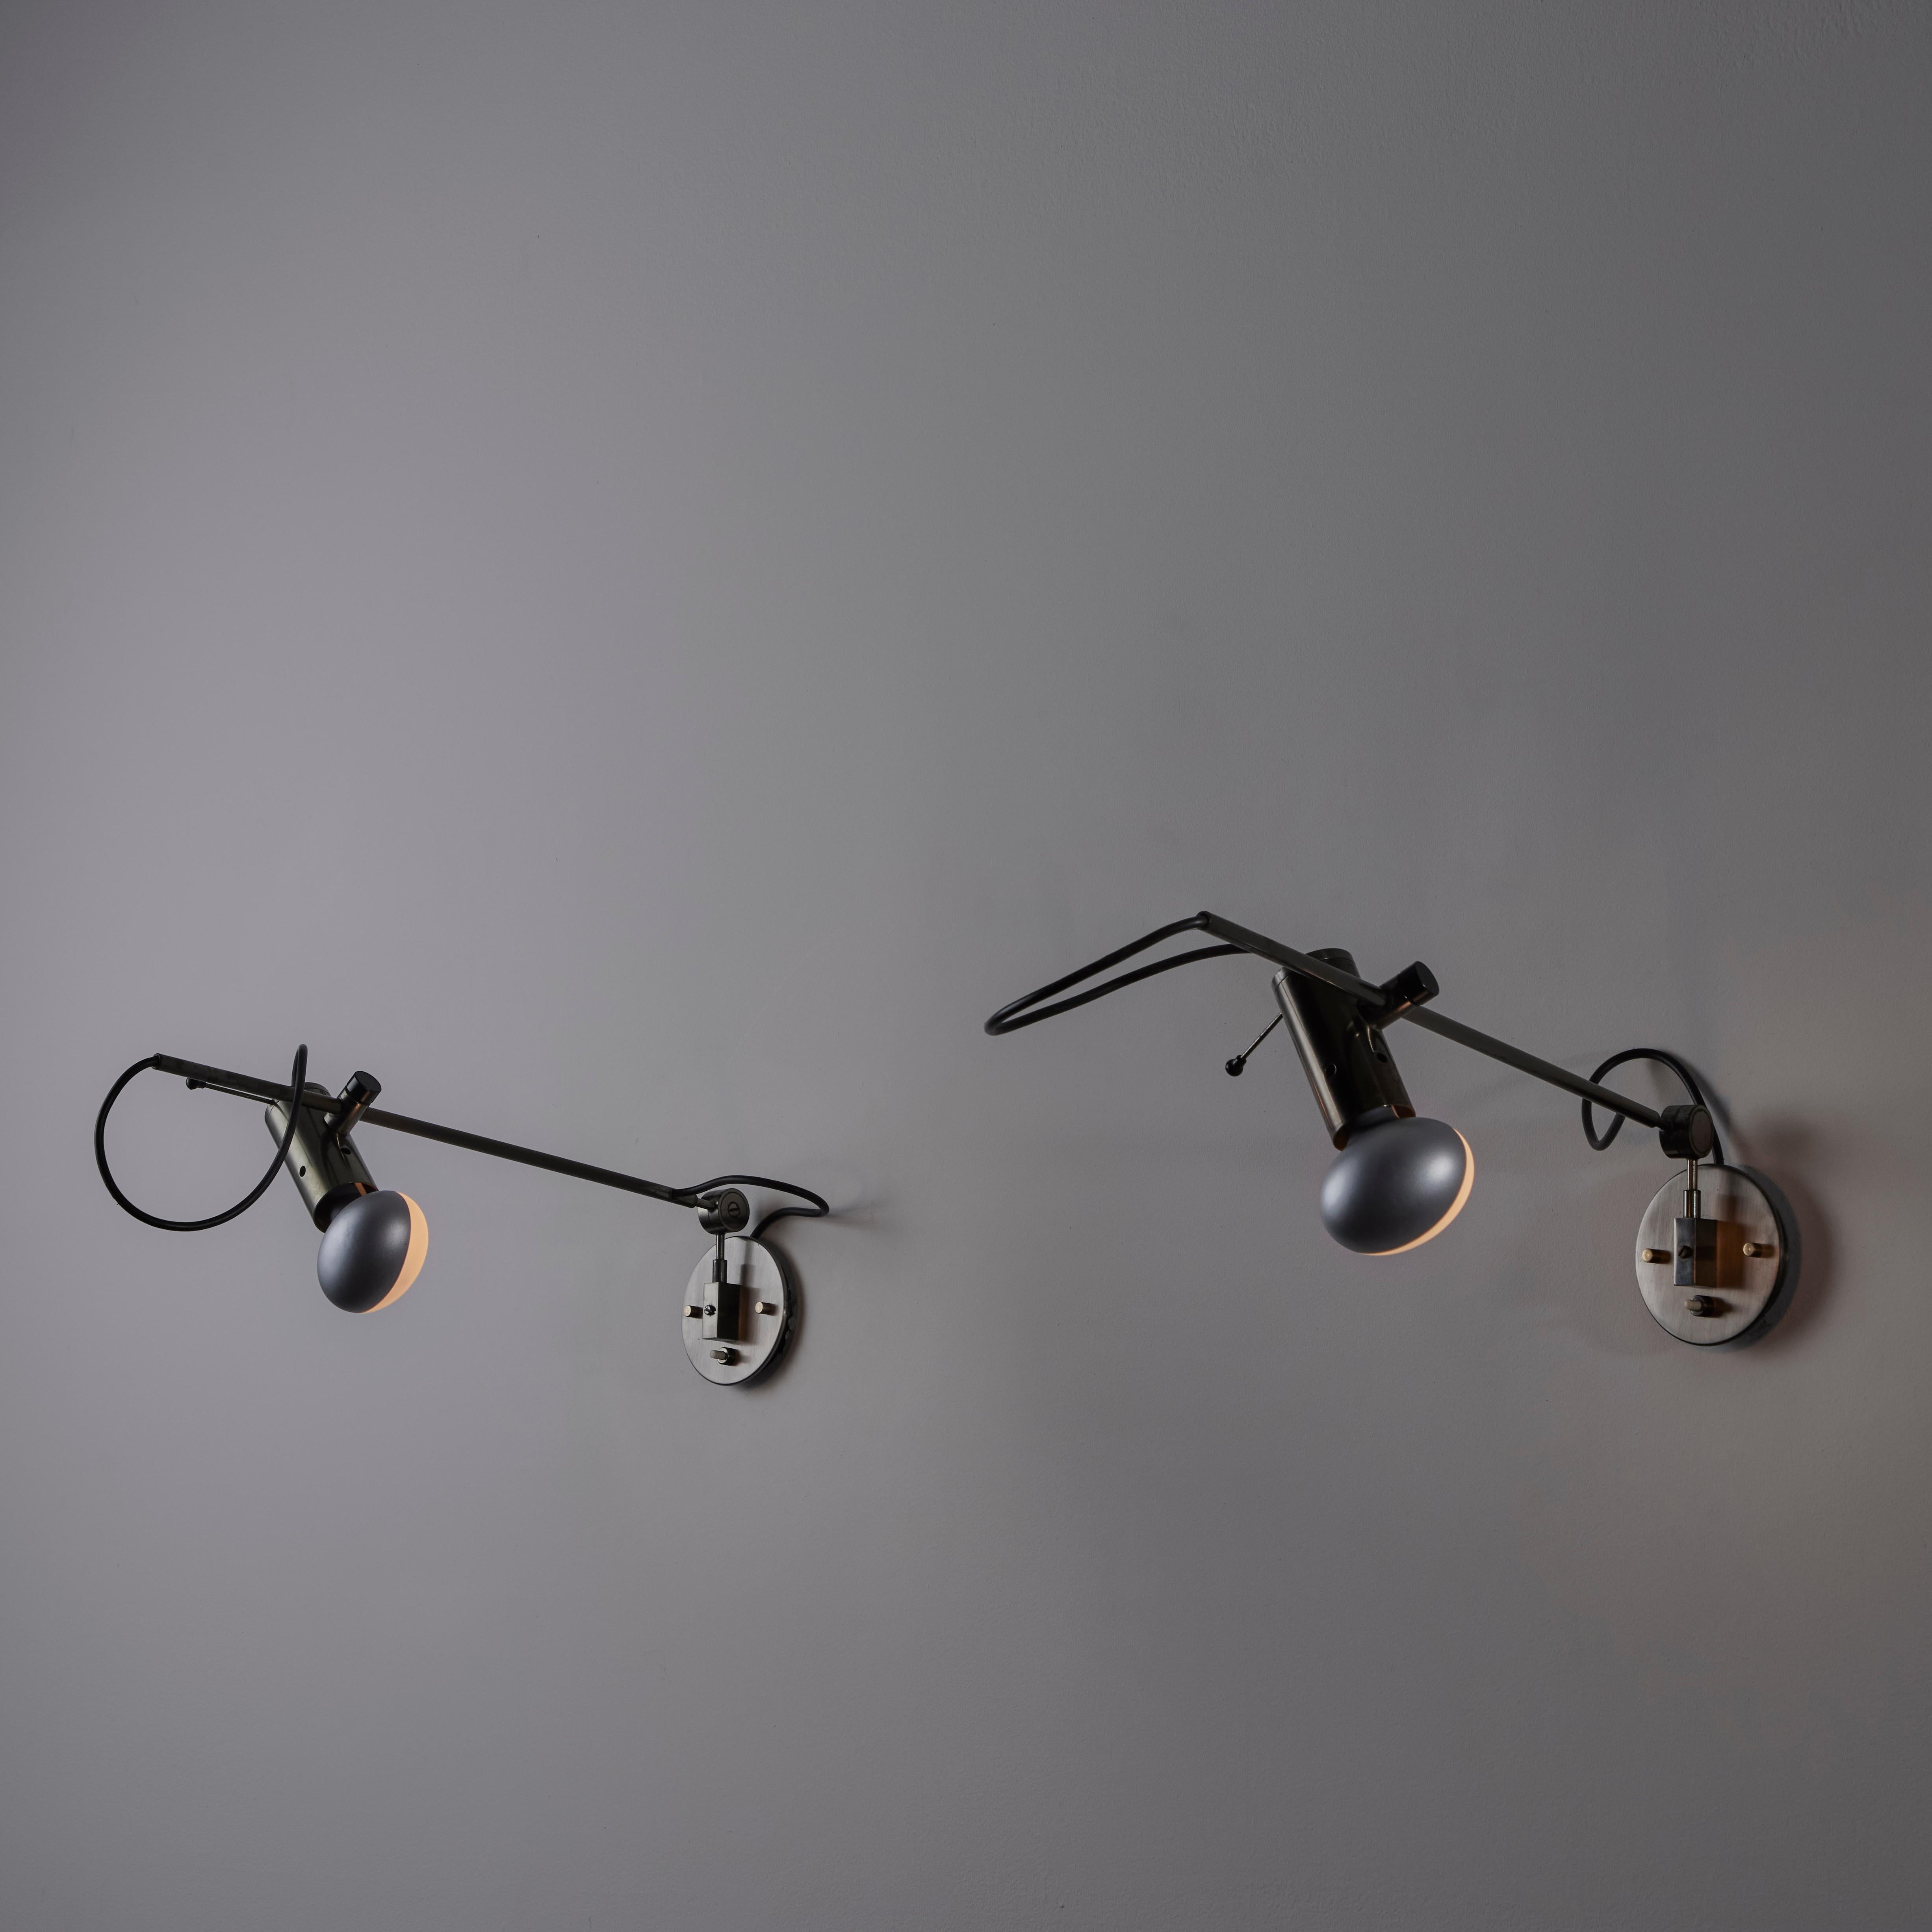 A Pair of Model 194 Sconces by Tito Agnoli for Oluce. Designed and manufactured in Italy, in 1954. Blackened nickel armatures with adjustability on height and light direction. The 